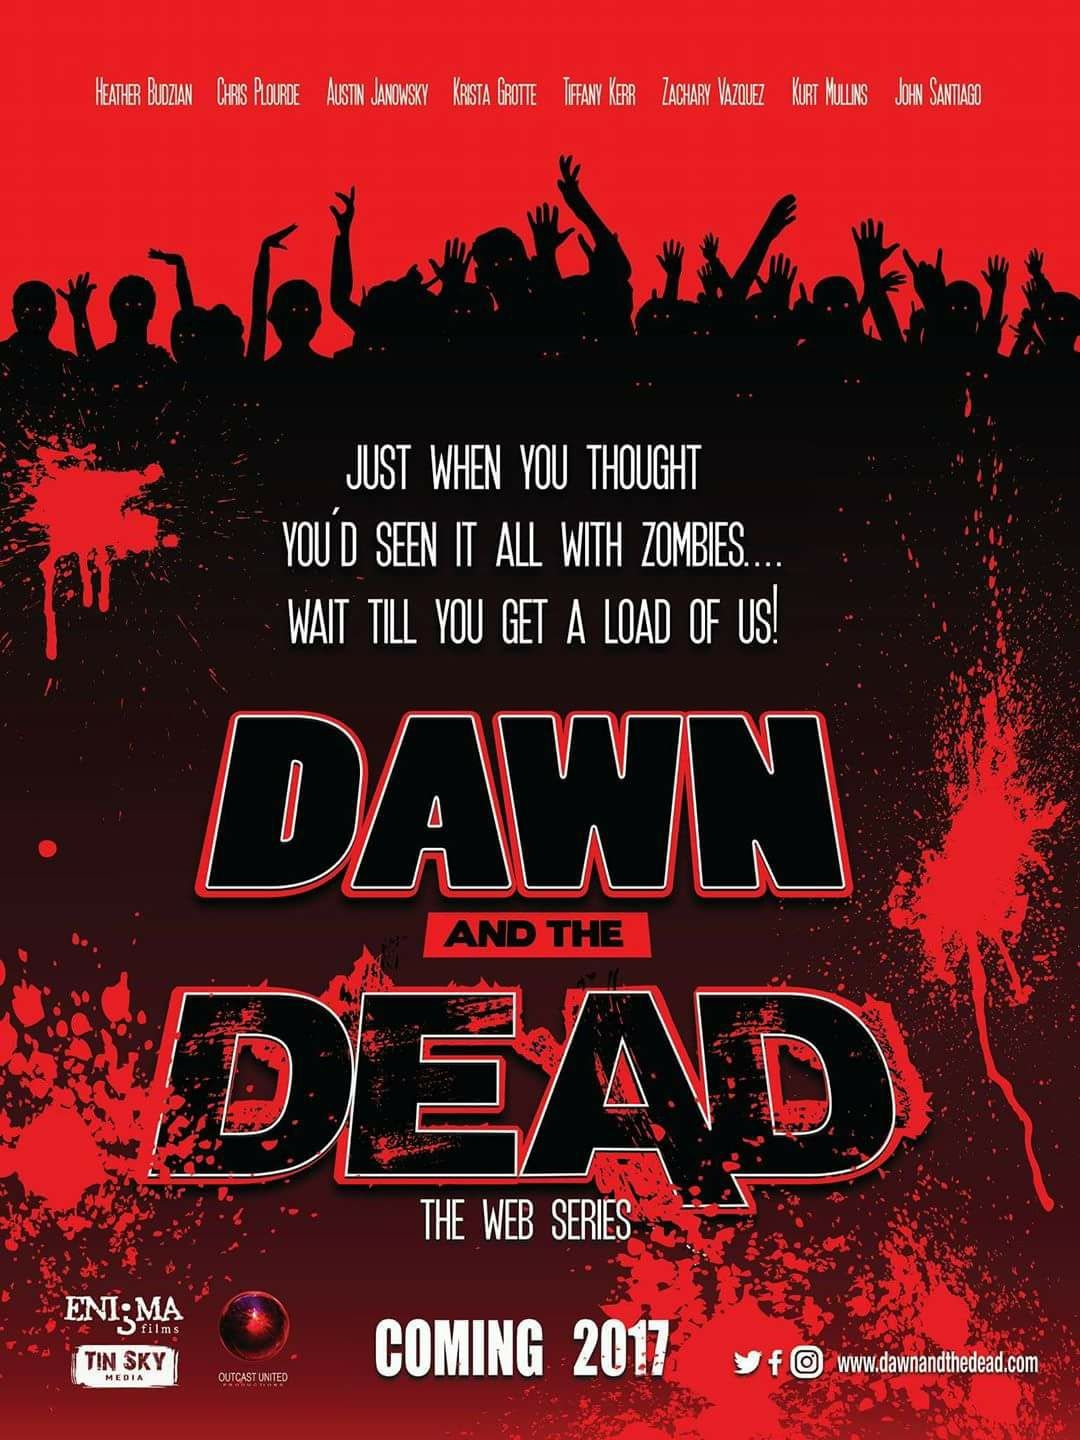 Austin Janowsky gives us a Behind the Scene View at MEGACON of the upcoming Dawn and The DEAD